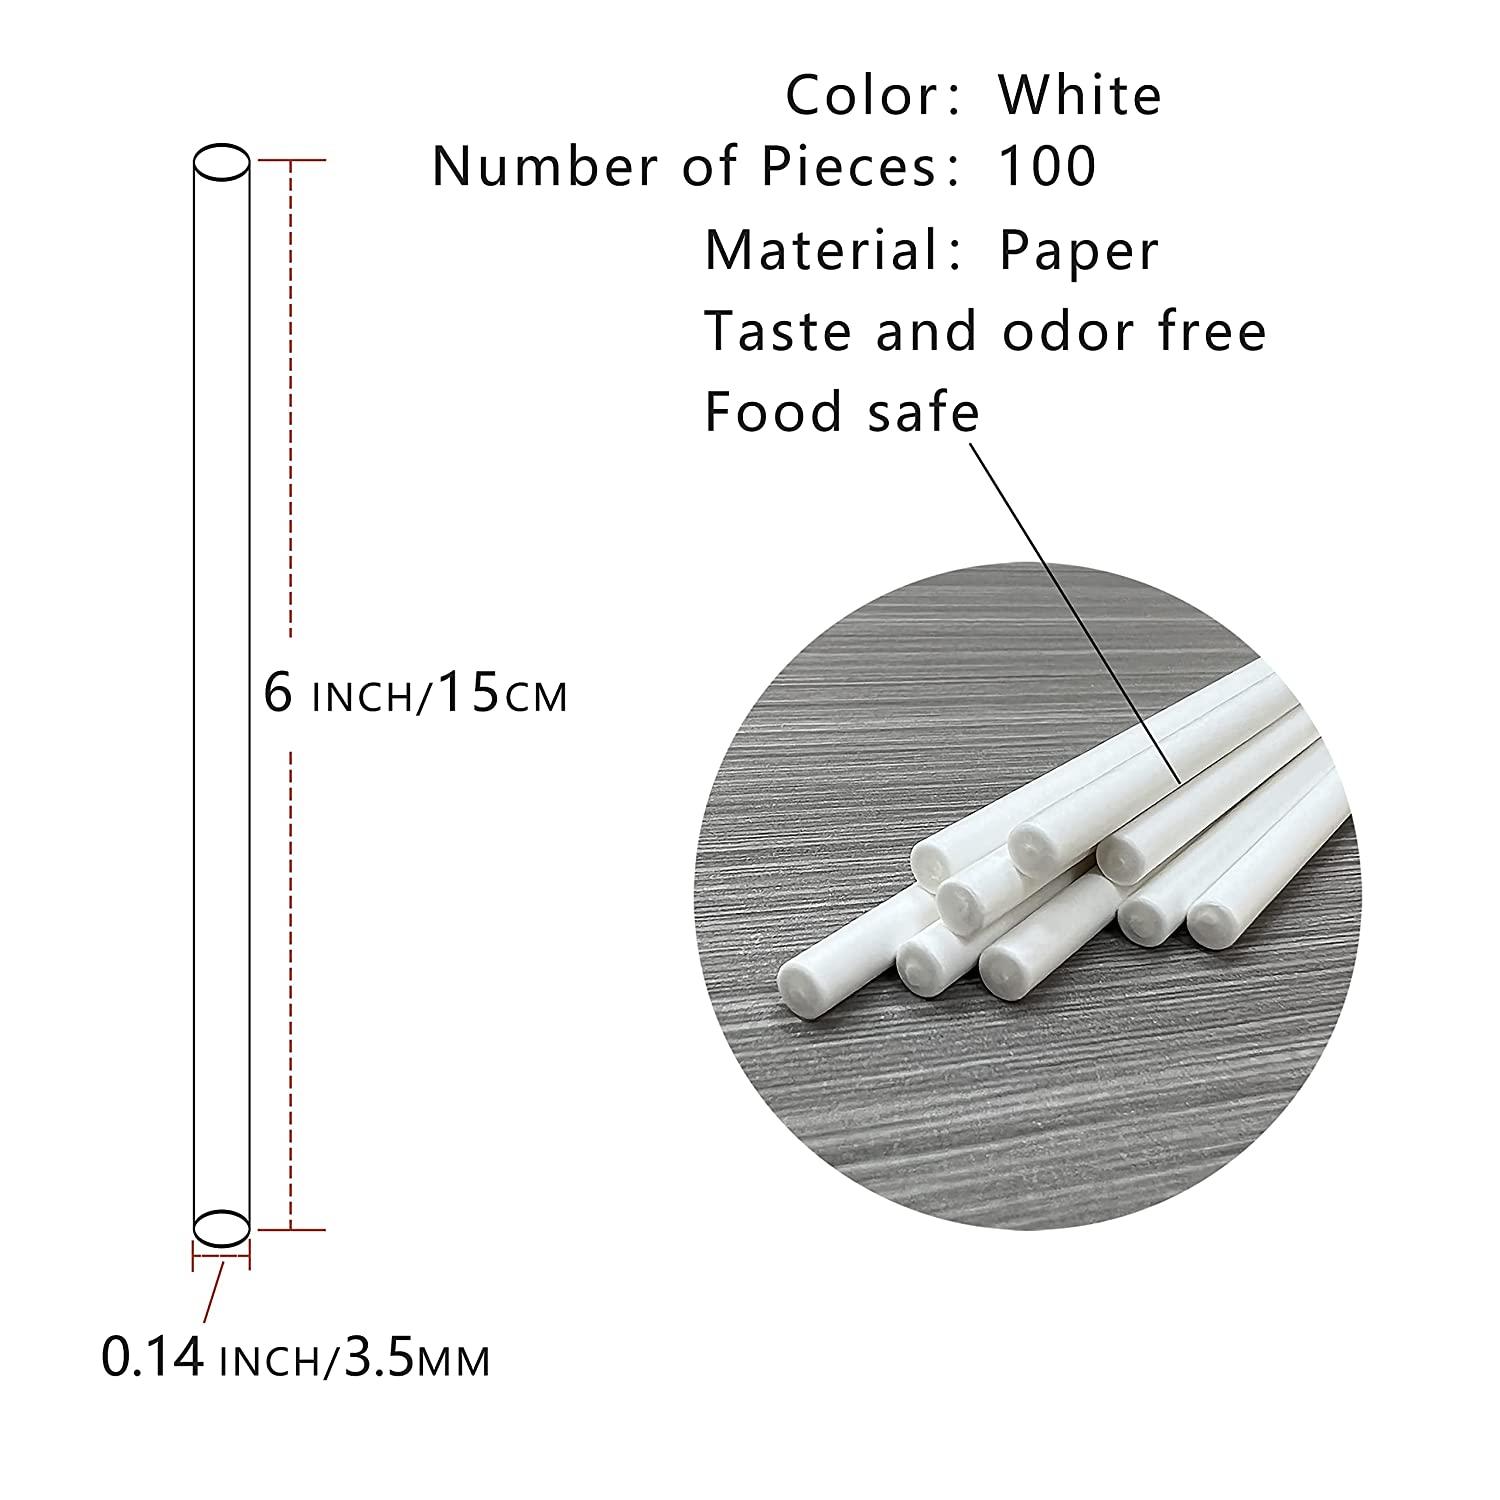 Cake Pop Sticks and Wrappers, Including 100 Pcs 6-Inch Paper